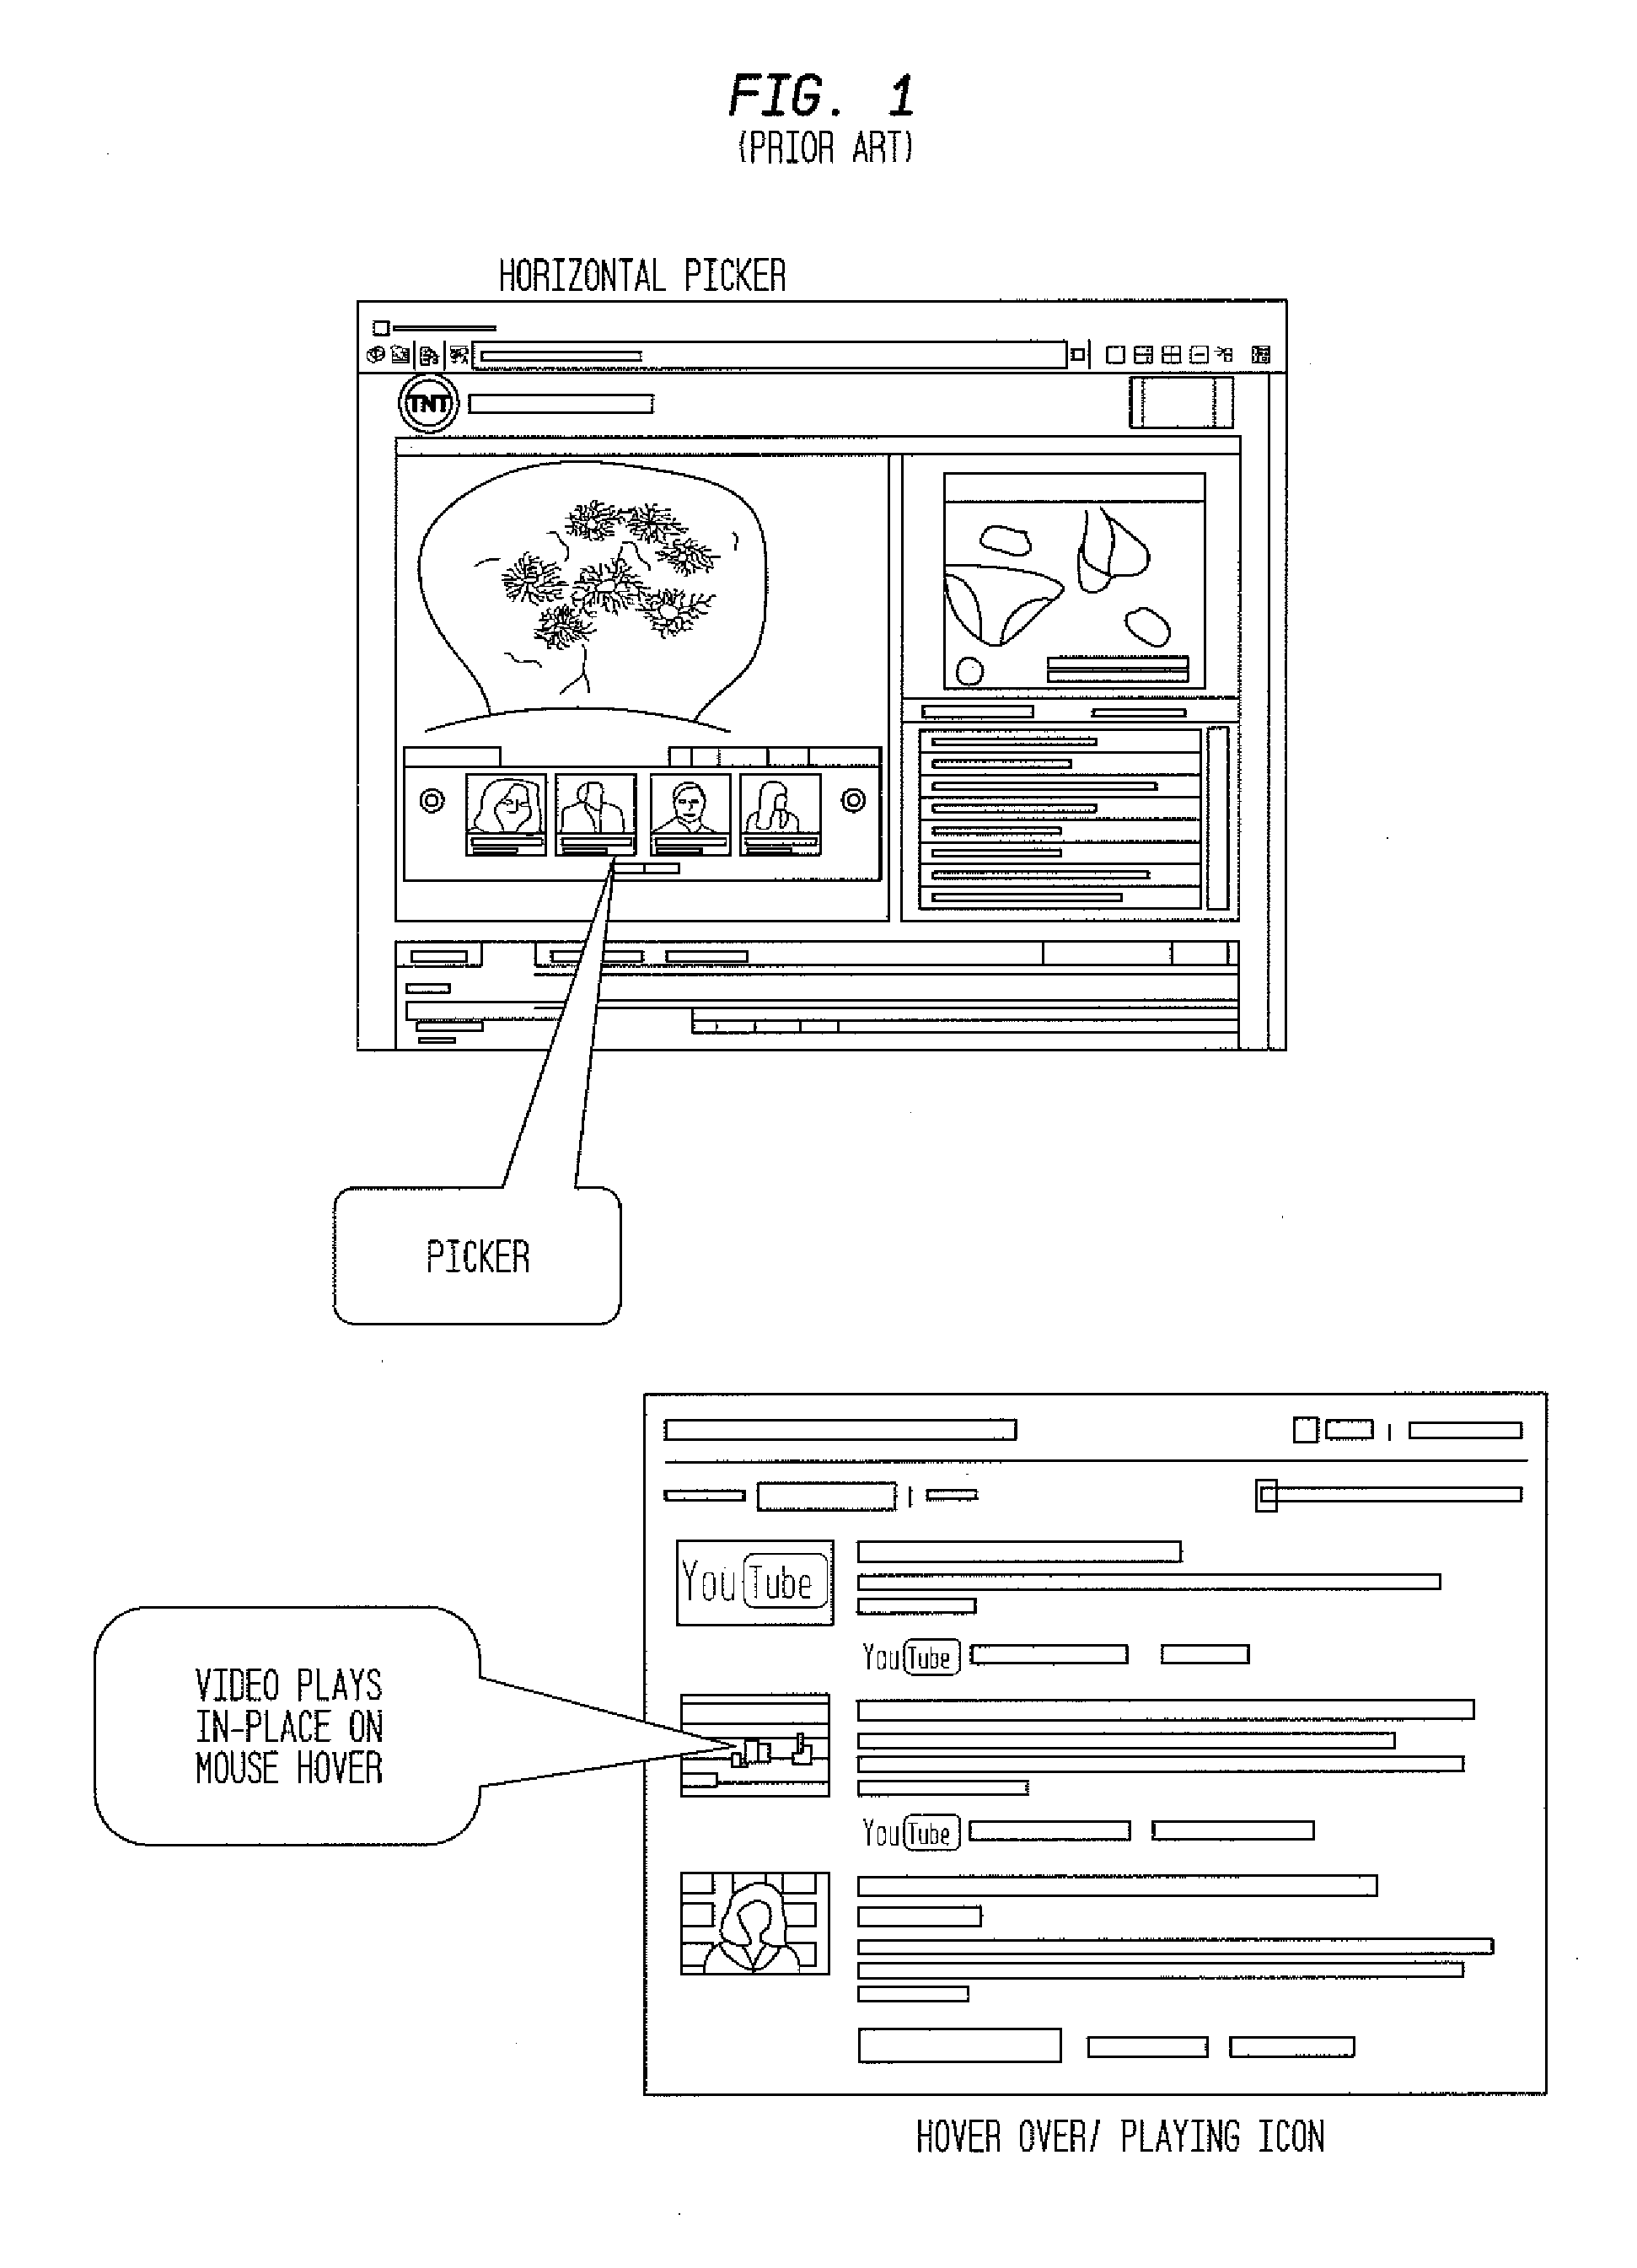 System and Method for Interactive Projection and Playback of Relevant Media Segments onto the Facets of Three-Dimensional Shapes